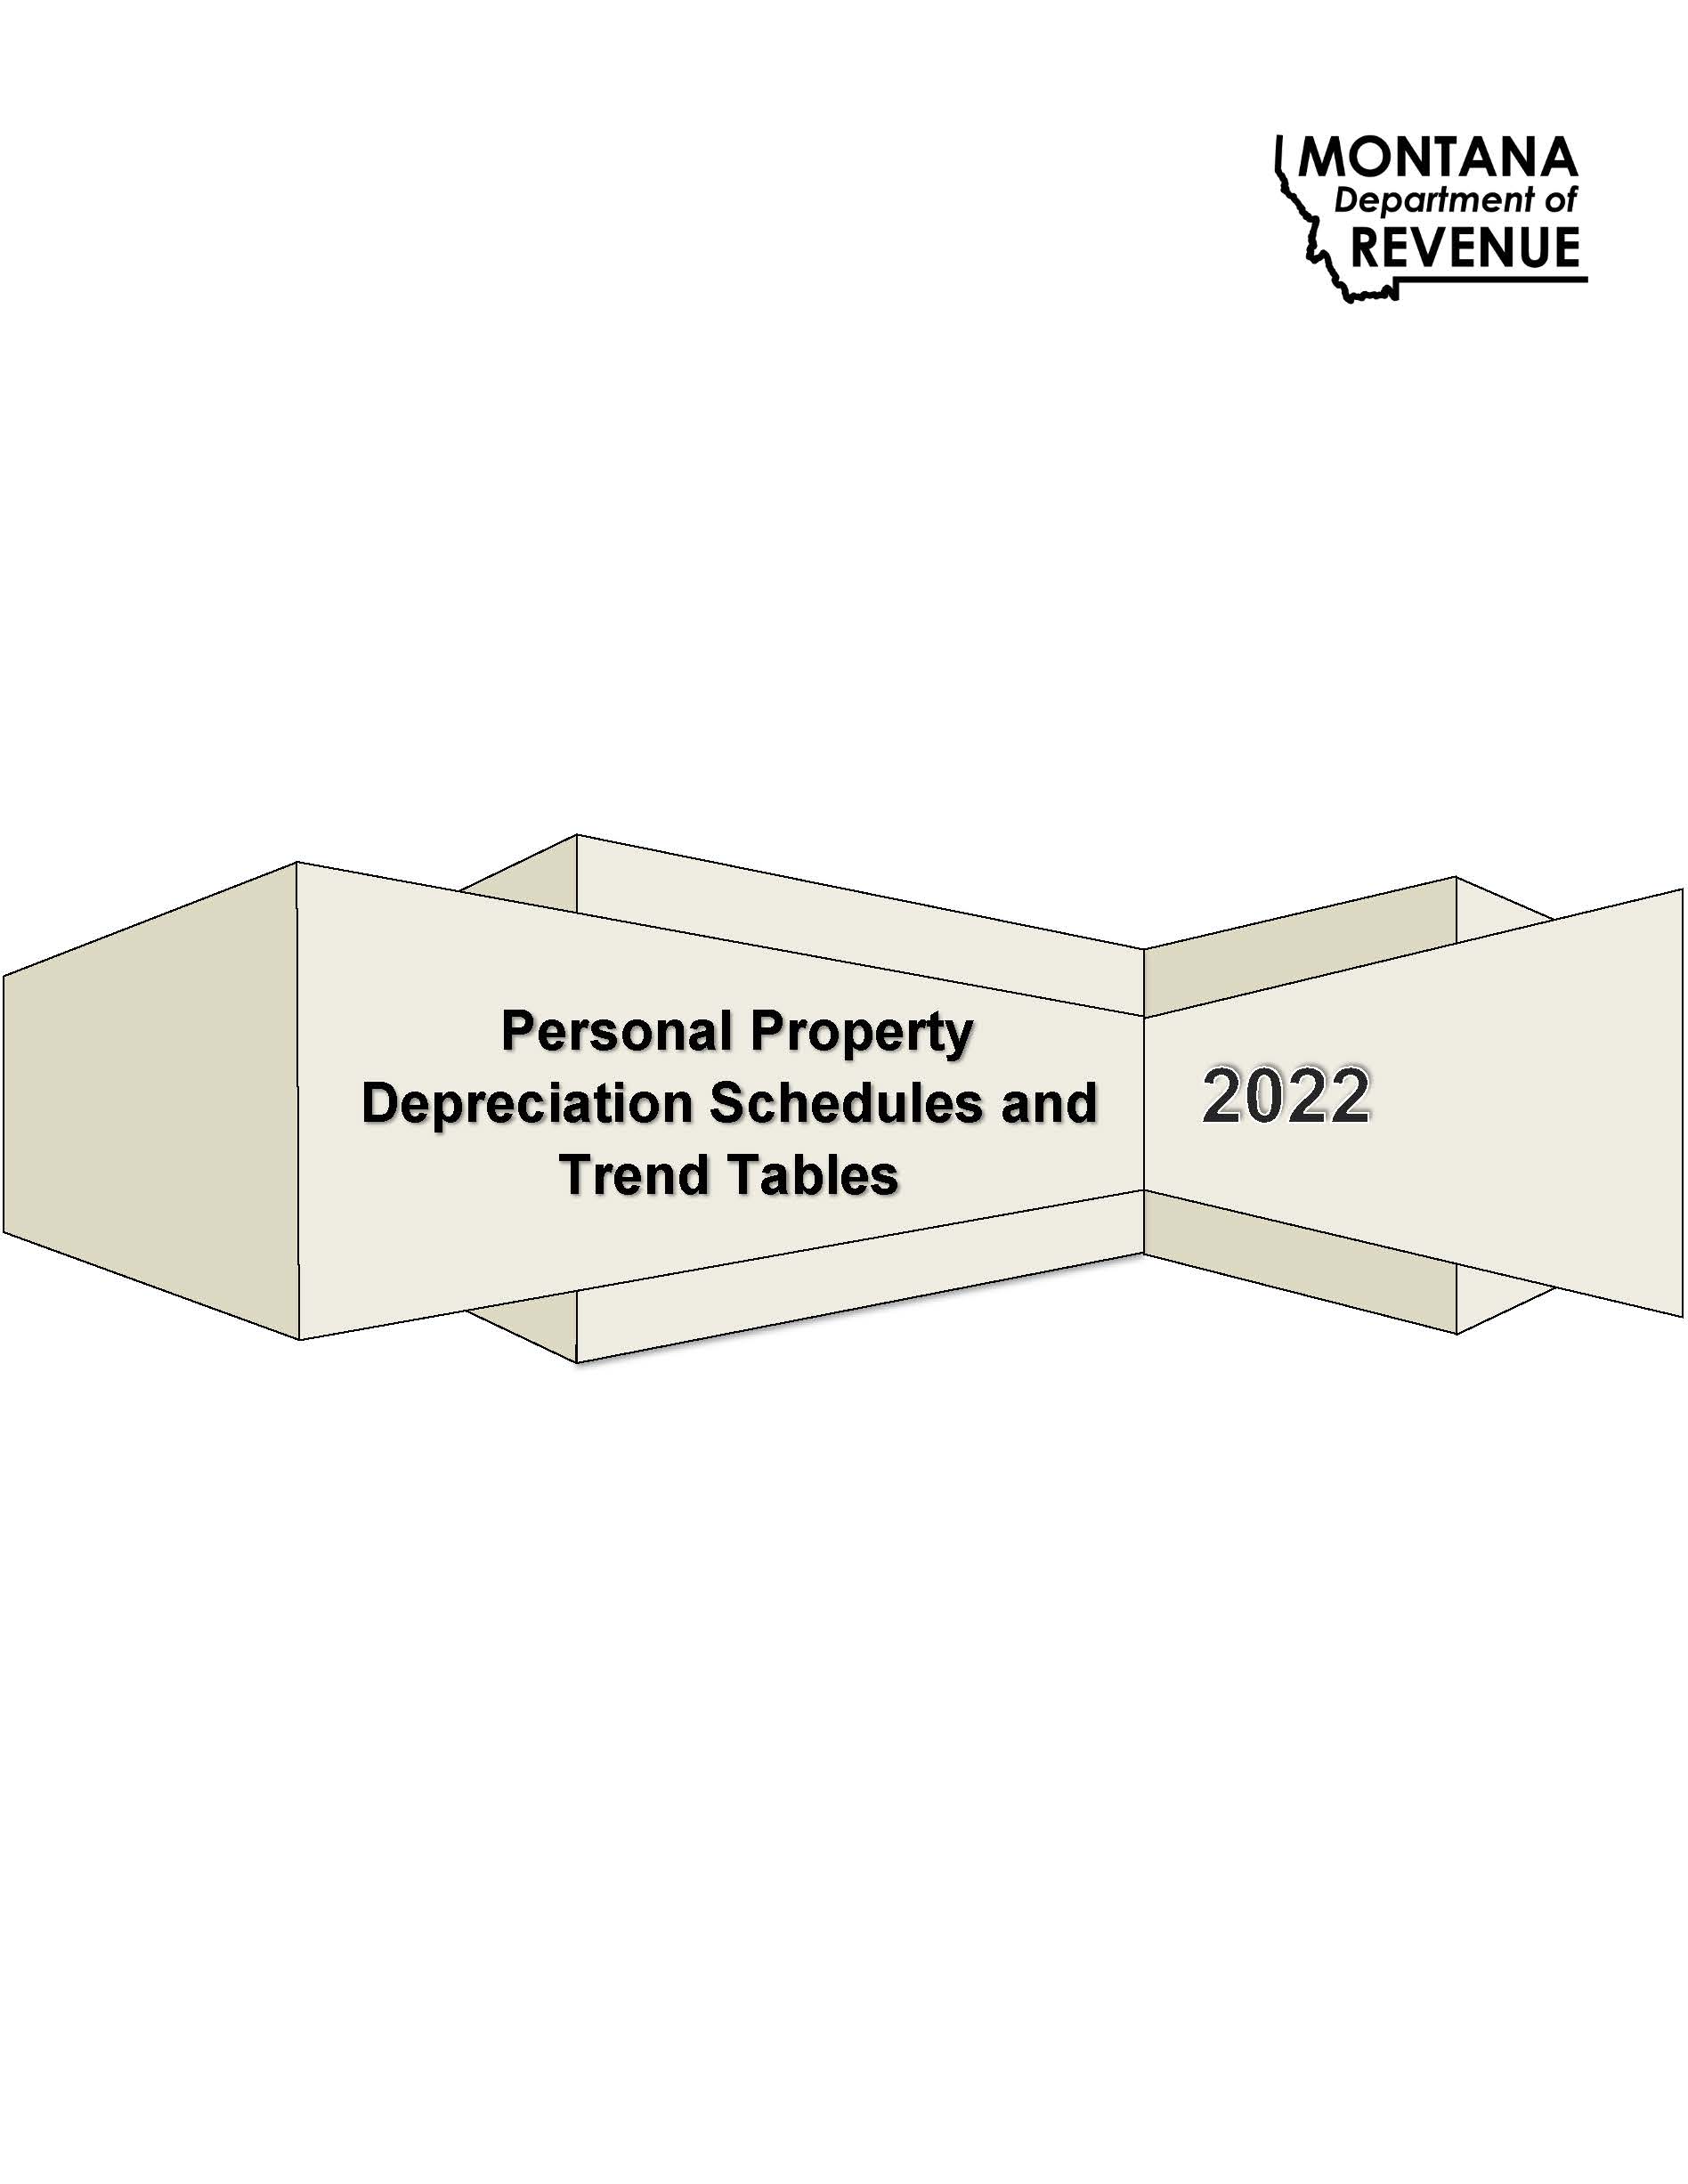 2022 Personal Property Depreciation Schedules and Trend Tables Cover